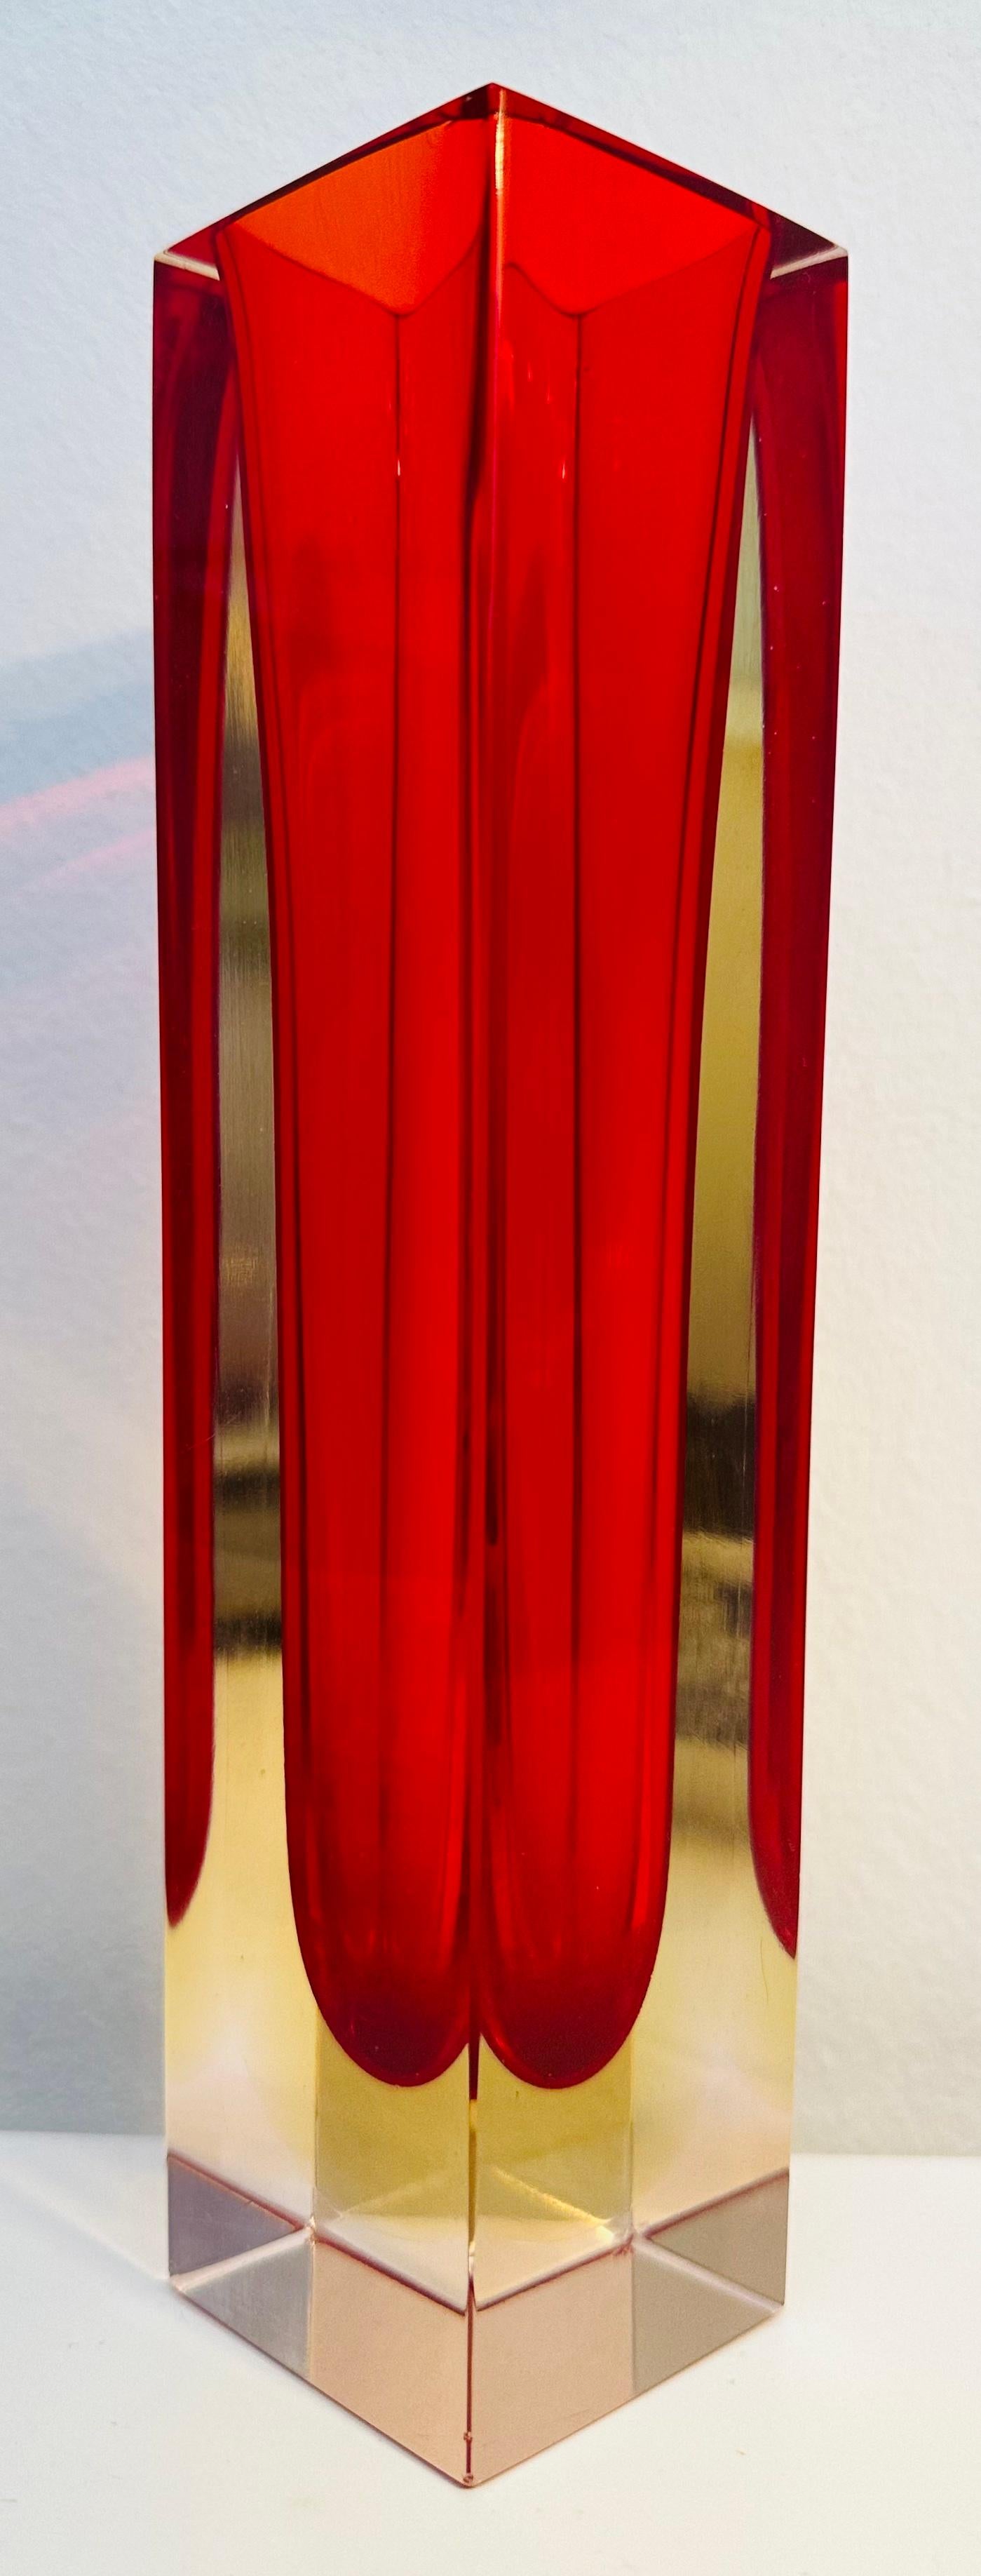 1970s Murano red, yellow and clear encased glass vase. A beautiful decorative piece perfect for a glass display case or shelf where the light can shine through it to emphasise the beautiful coloured glass. The vase is made in the Sommerso